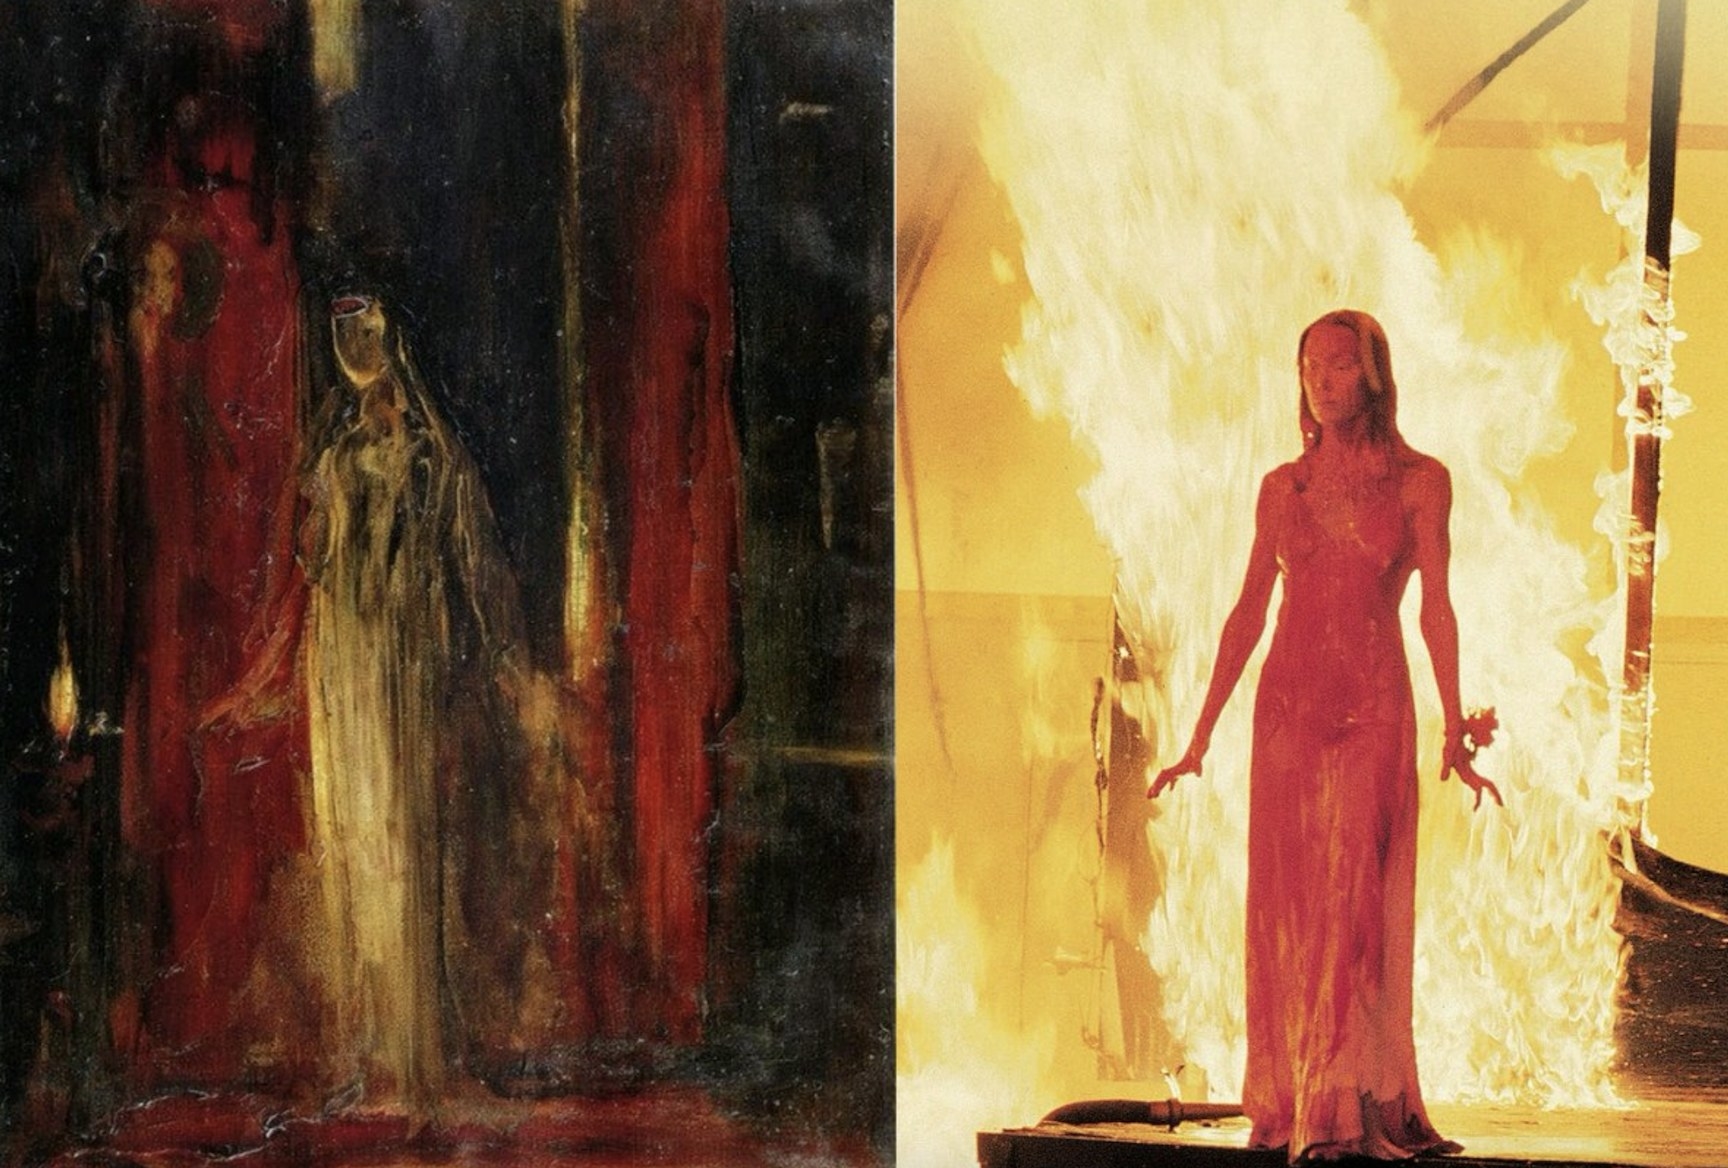 Carrie in the same pose as the painting